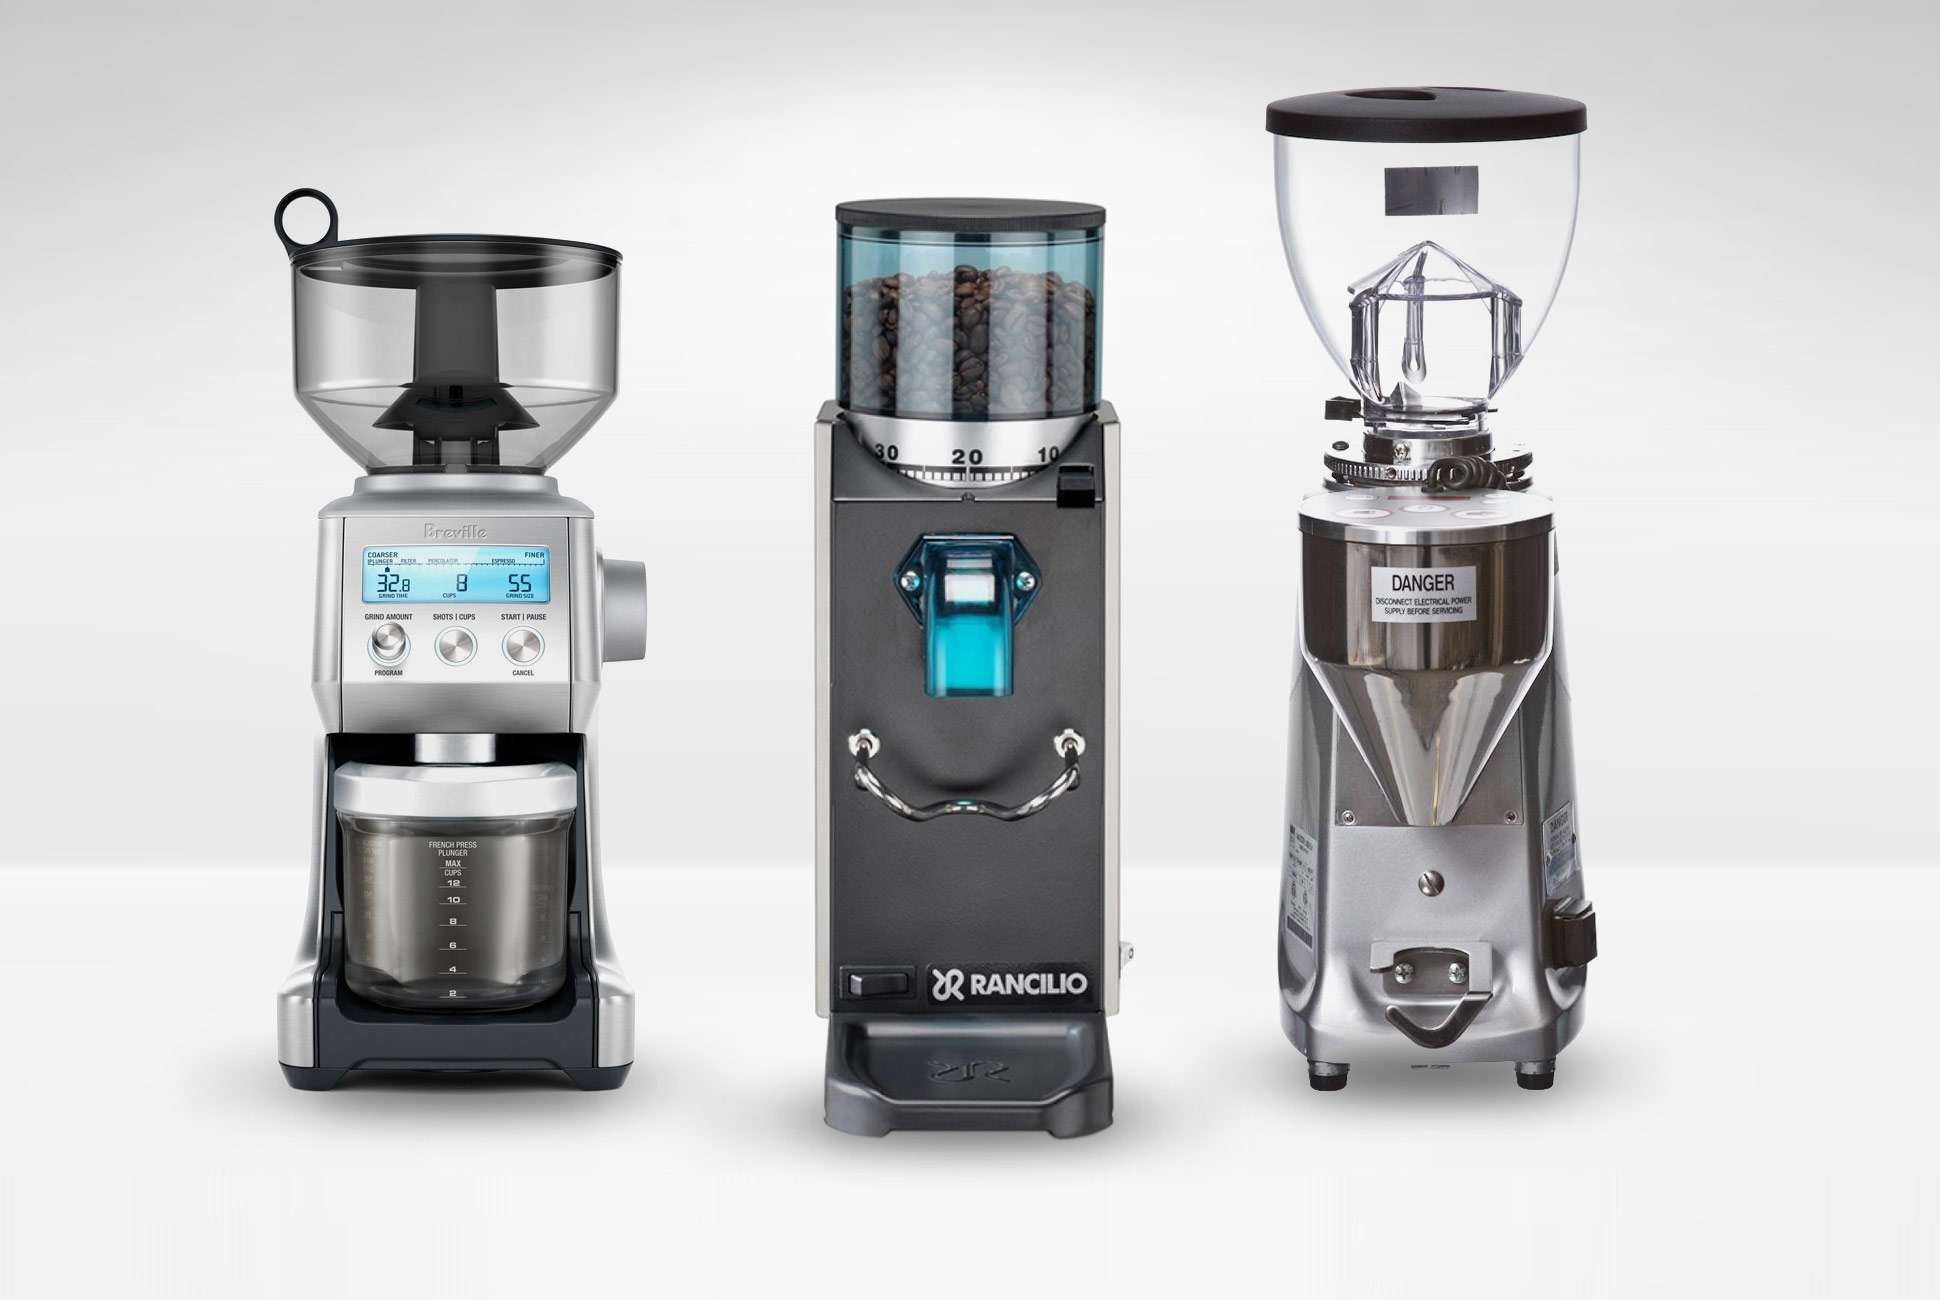 Top 5 Best Coffee Grinders For Making Espresso At Home